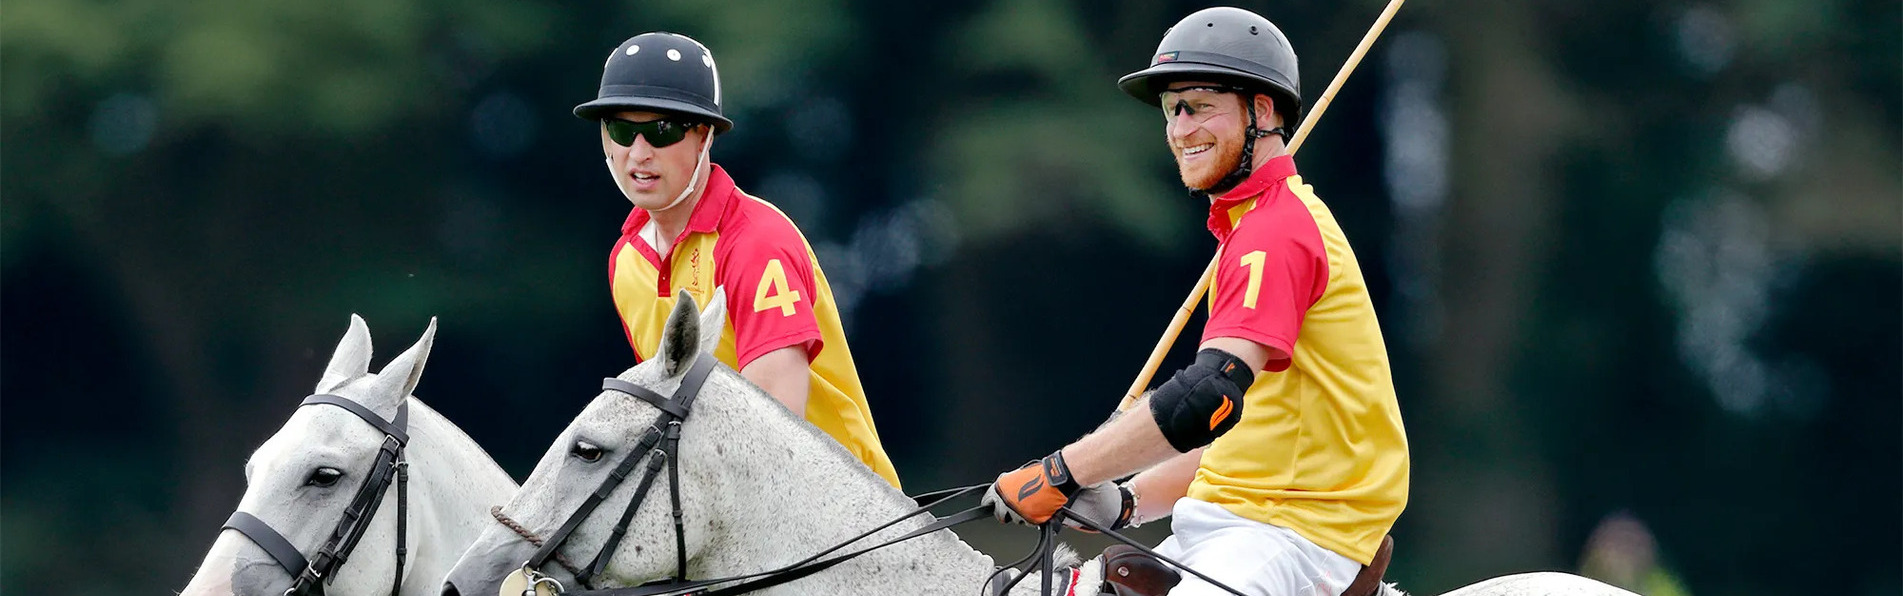 https://www.kronopolo.com/image/cache/catalog/Blog%20Banners/prince%20harry%20and%20prince%20william%20playing%20polo-1903x596.jpg